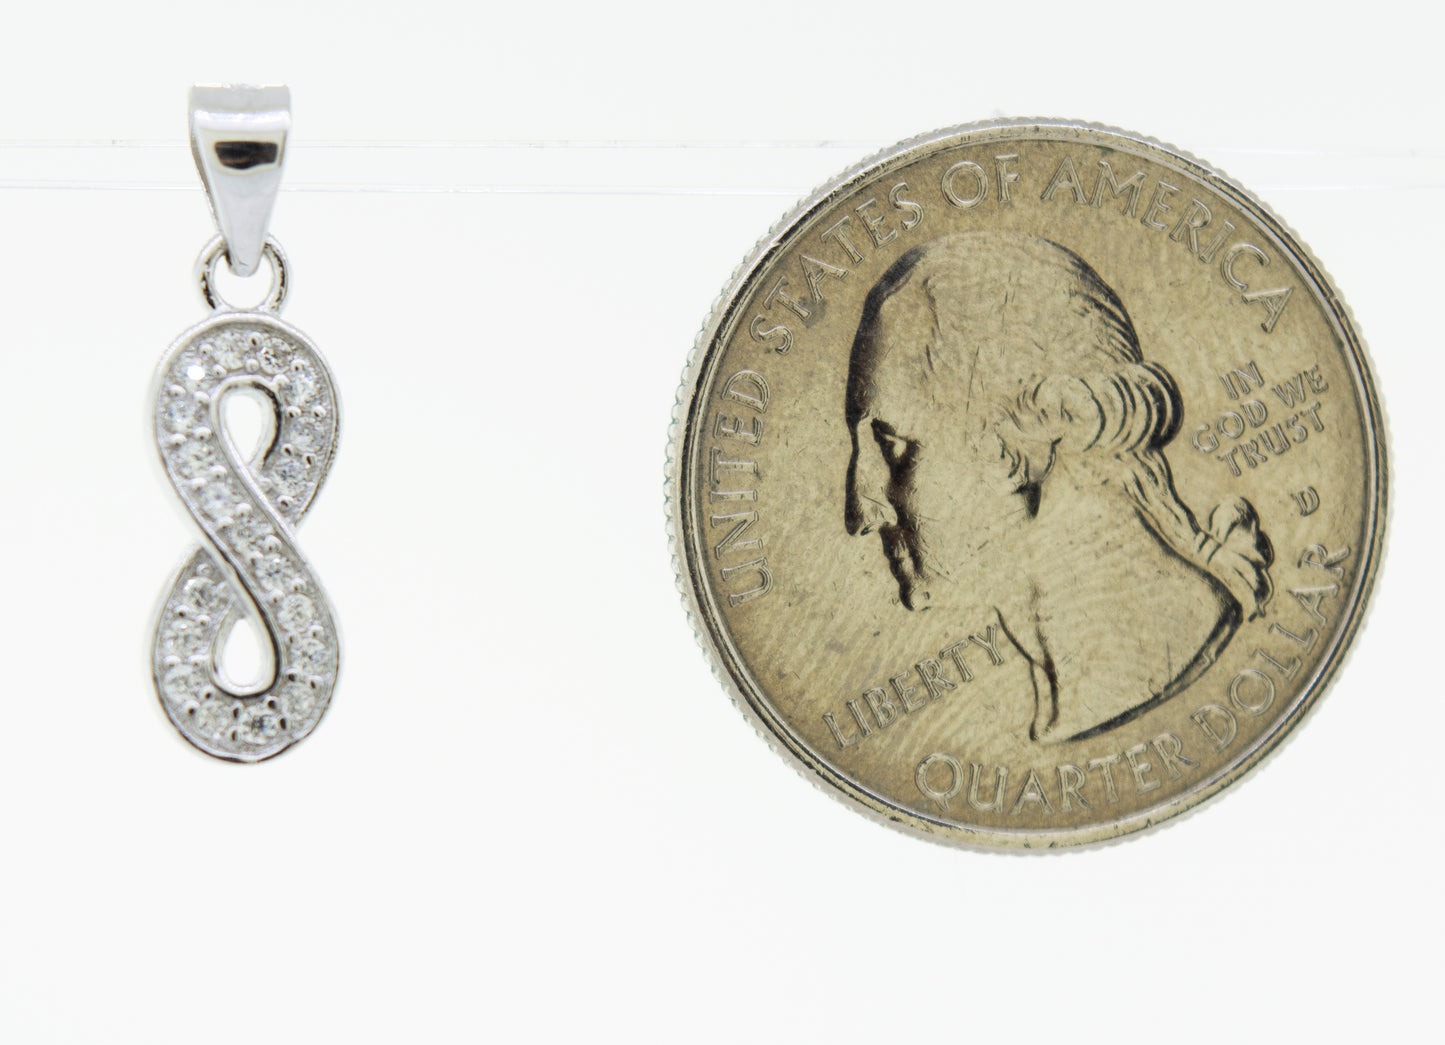 A Cubic Zirconia Infinity Pendant from Super Silver shimmering beside a penny.